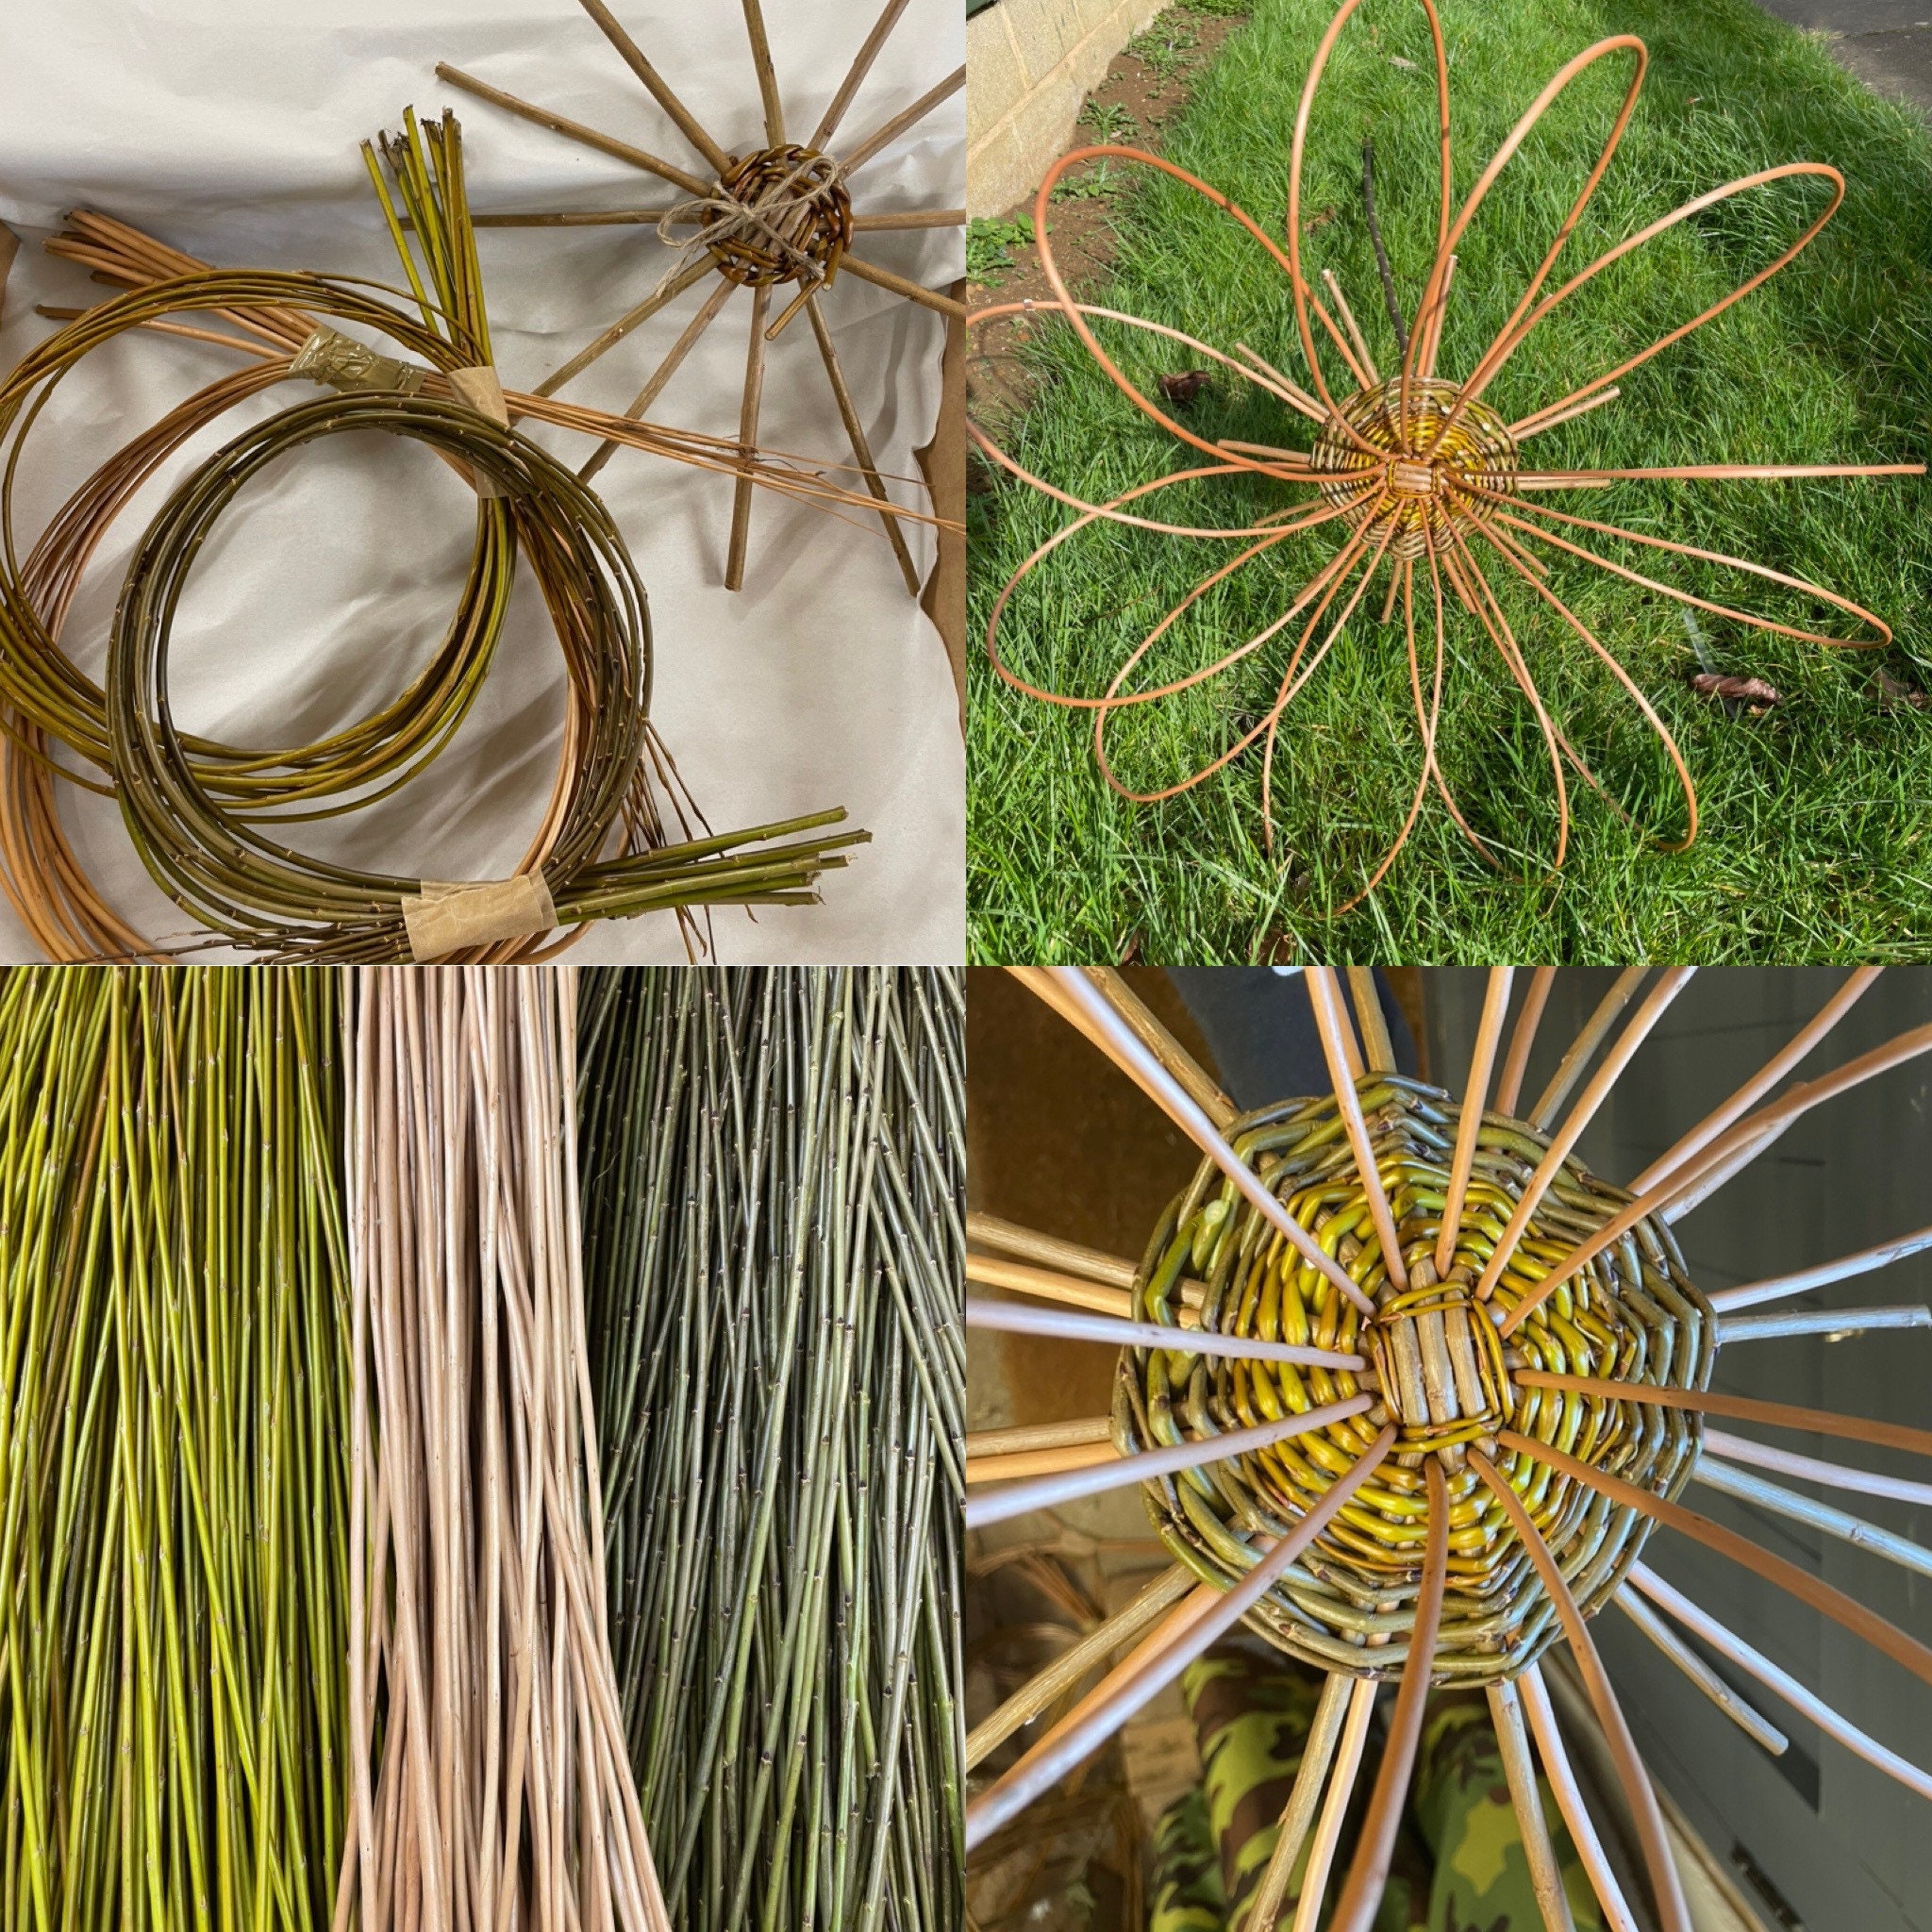 craft kits, willow weaving, painting